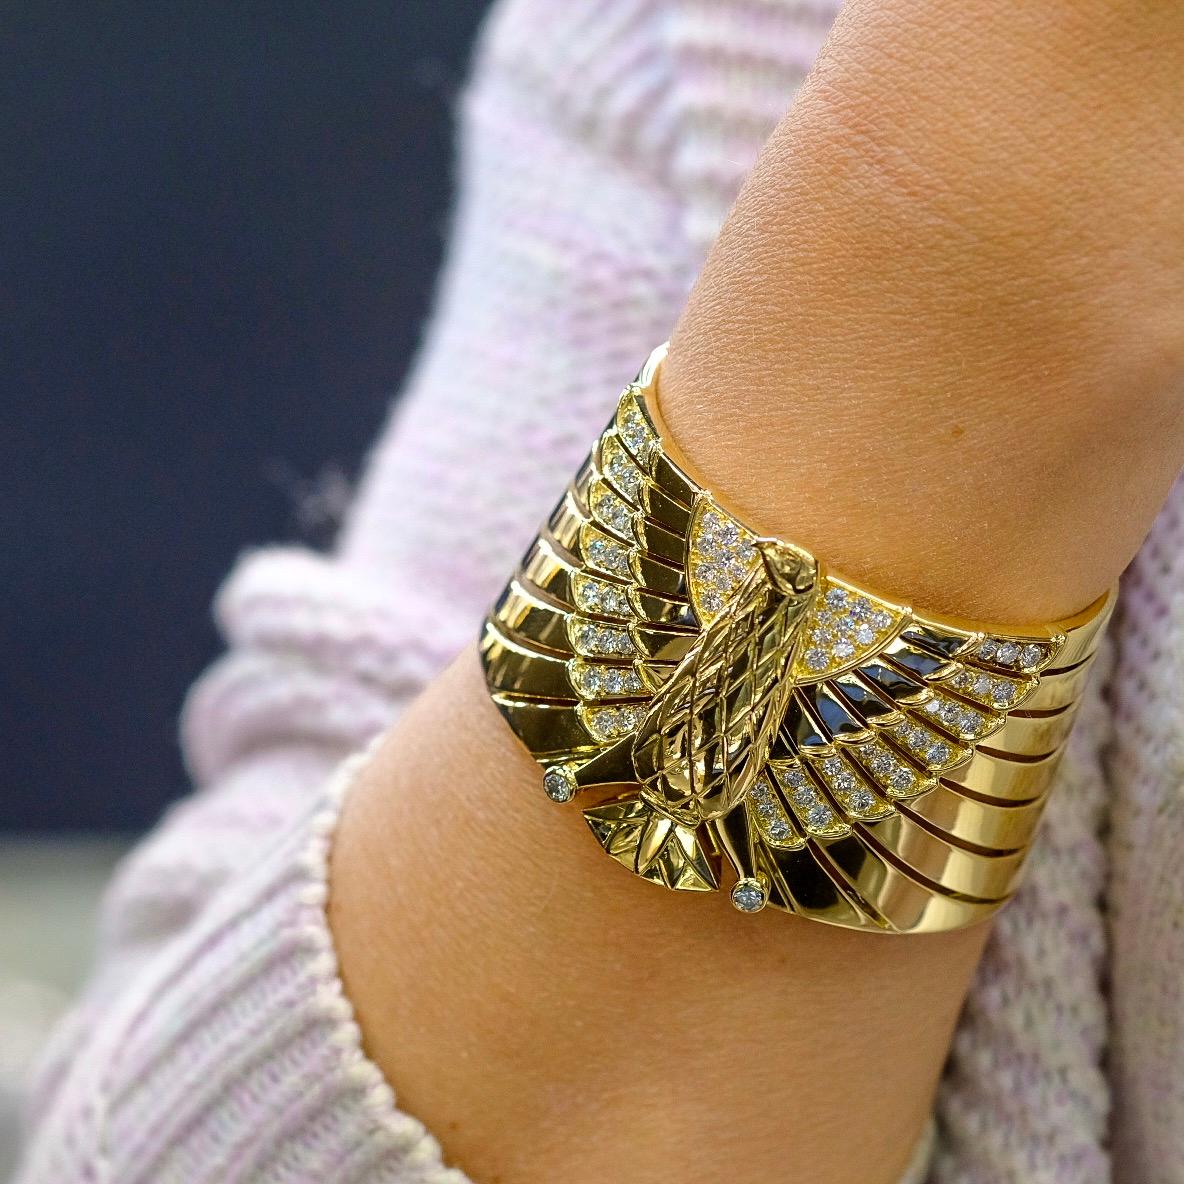 Cartier 18K Yellow Gold Egyptian Horus Falcon Bracelet In Excellent Condition For Sale In New York, NY